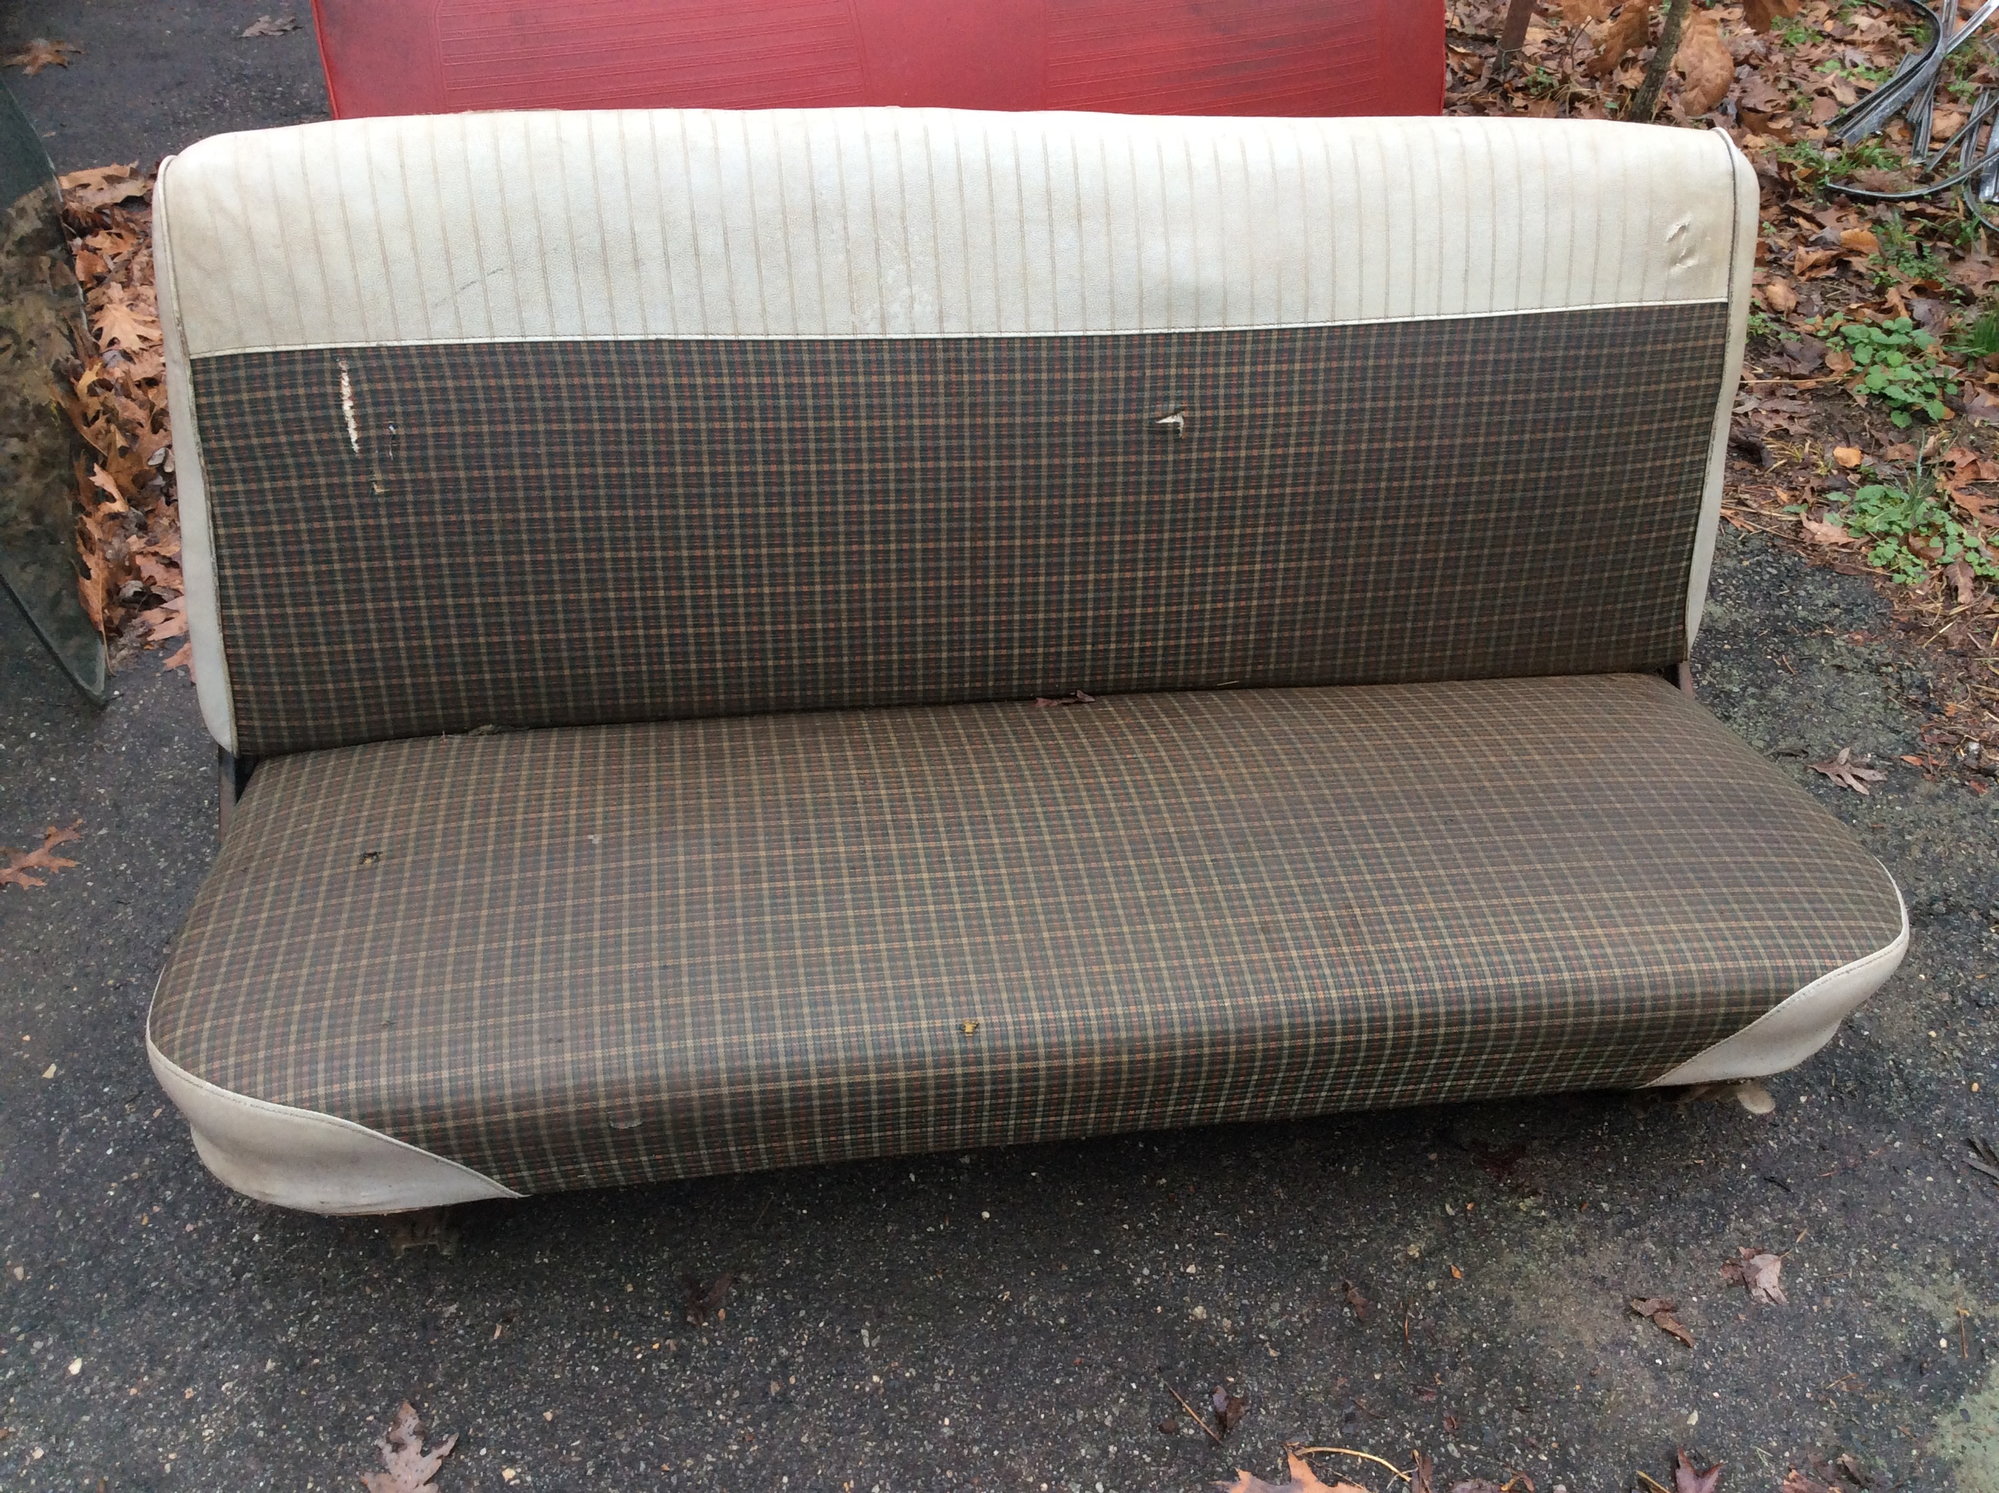 Interior/Upholstery - F100 Bench Seats - Used - 1961 to 1979  All Models - Richmond, VA 23226, United States